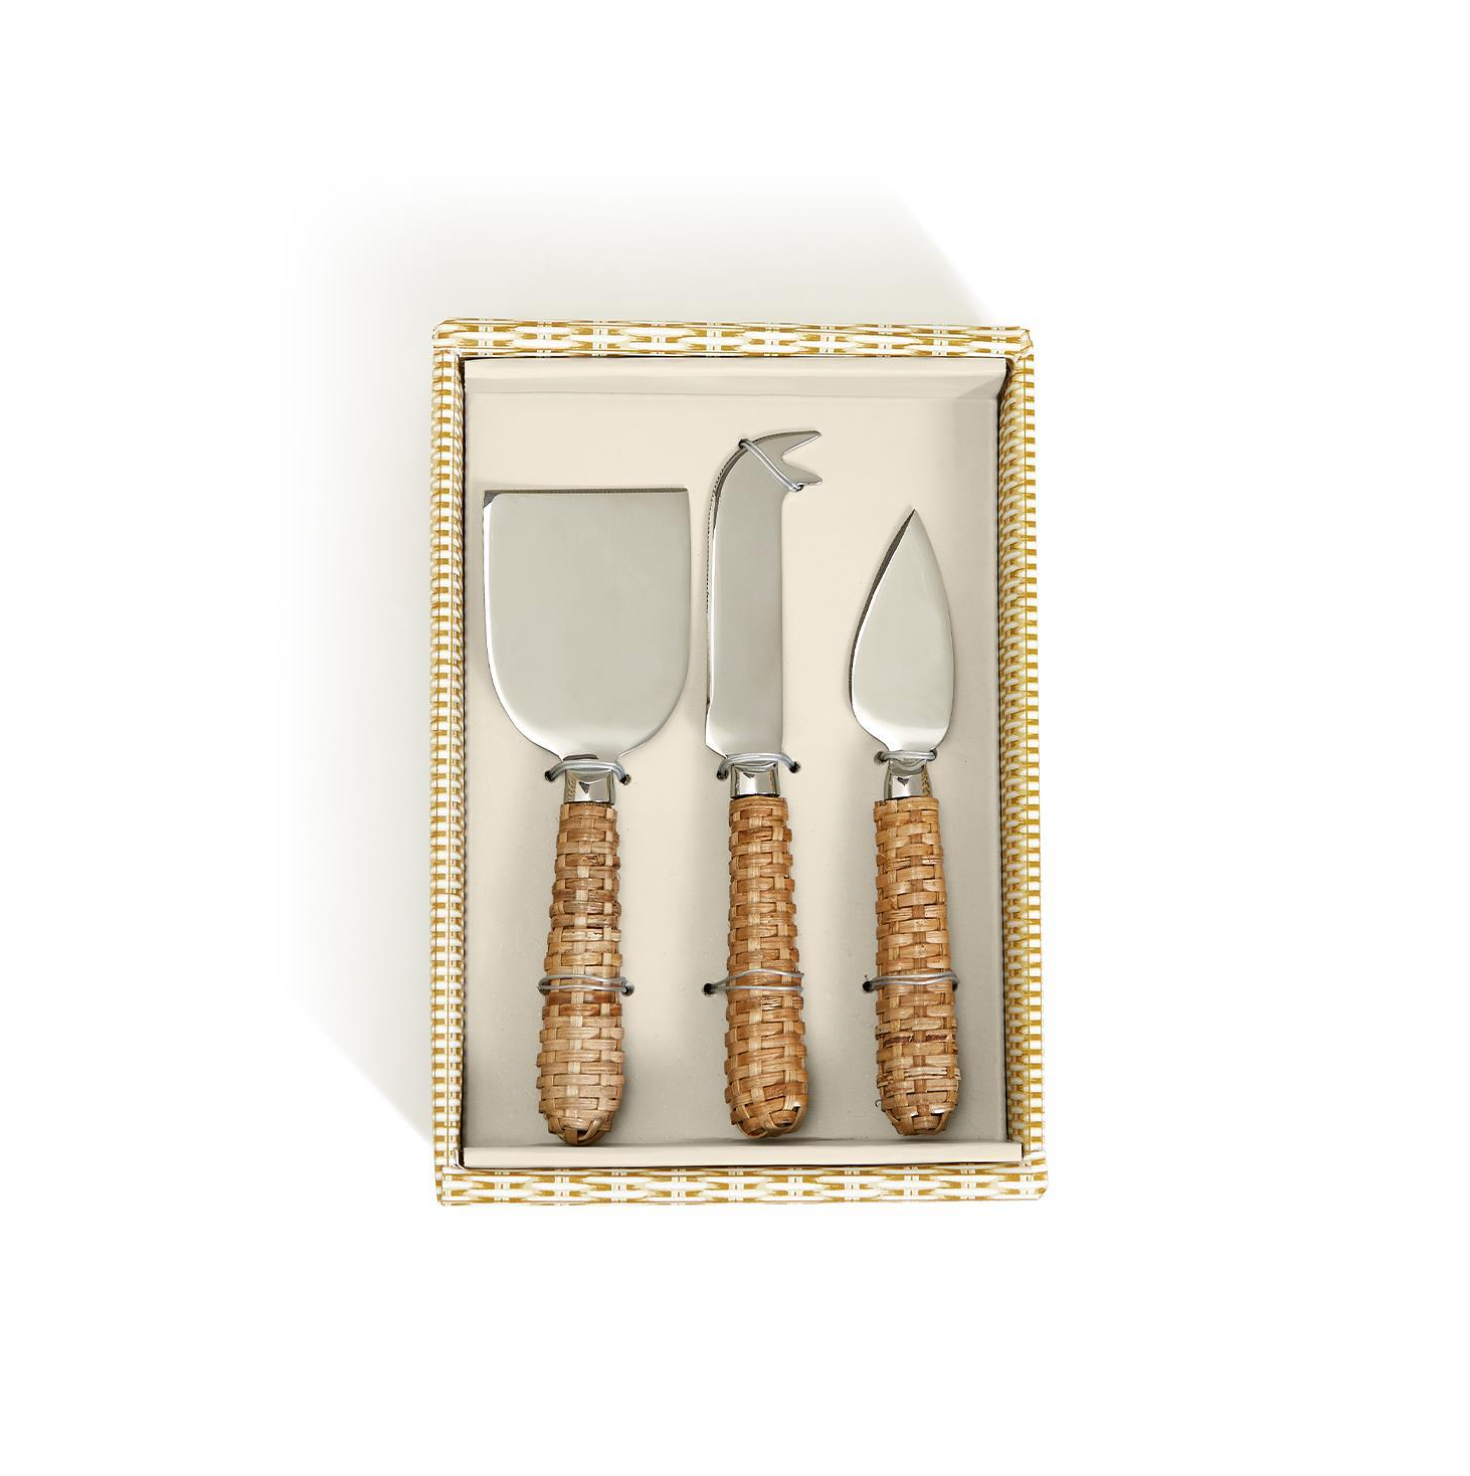 Wicker Weave Set/3 Cheese Knives